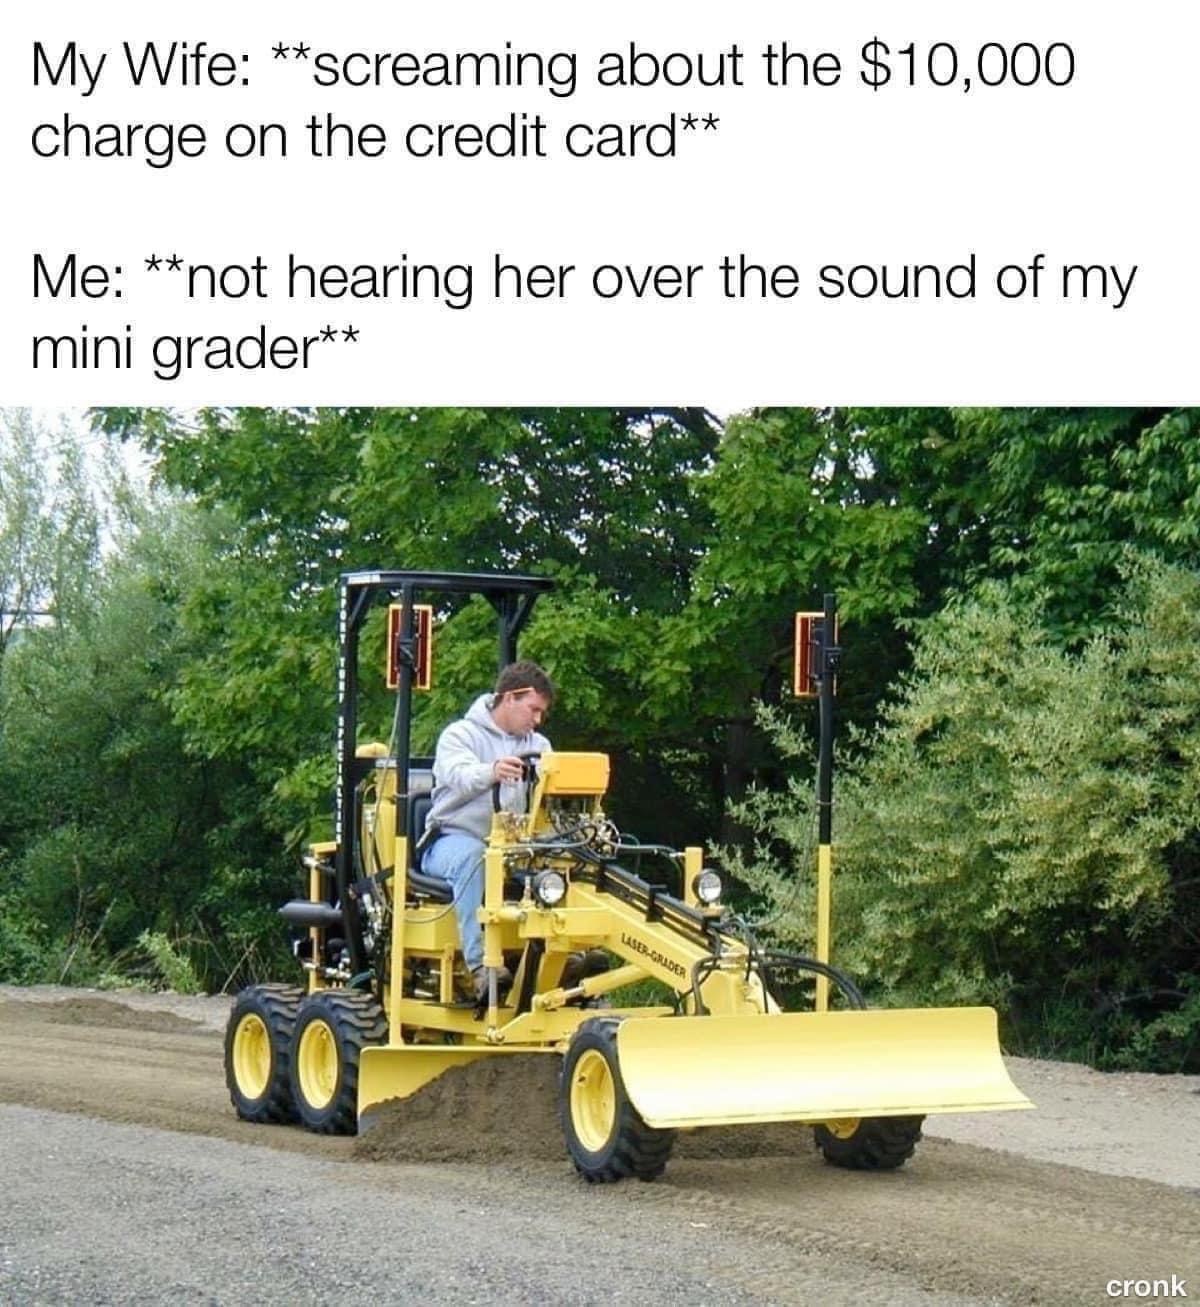 dank memes - mini grader meme - My Wife screaming about the $10,000 charge on the credit card Me not hearing her over the sound of my mini grader LaserGrader cronk